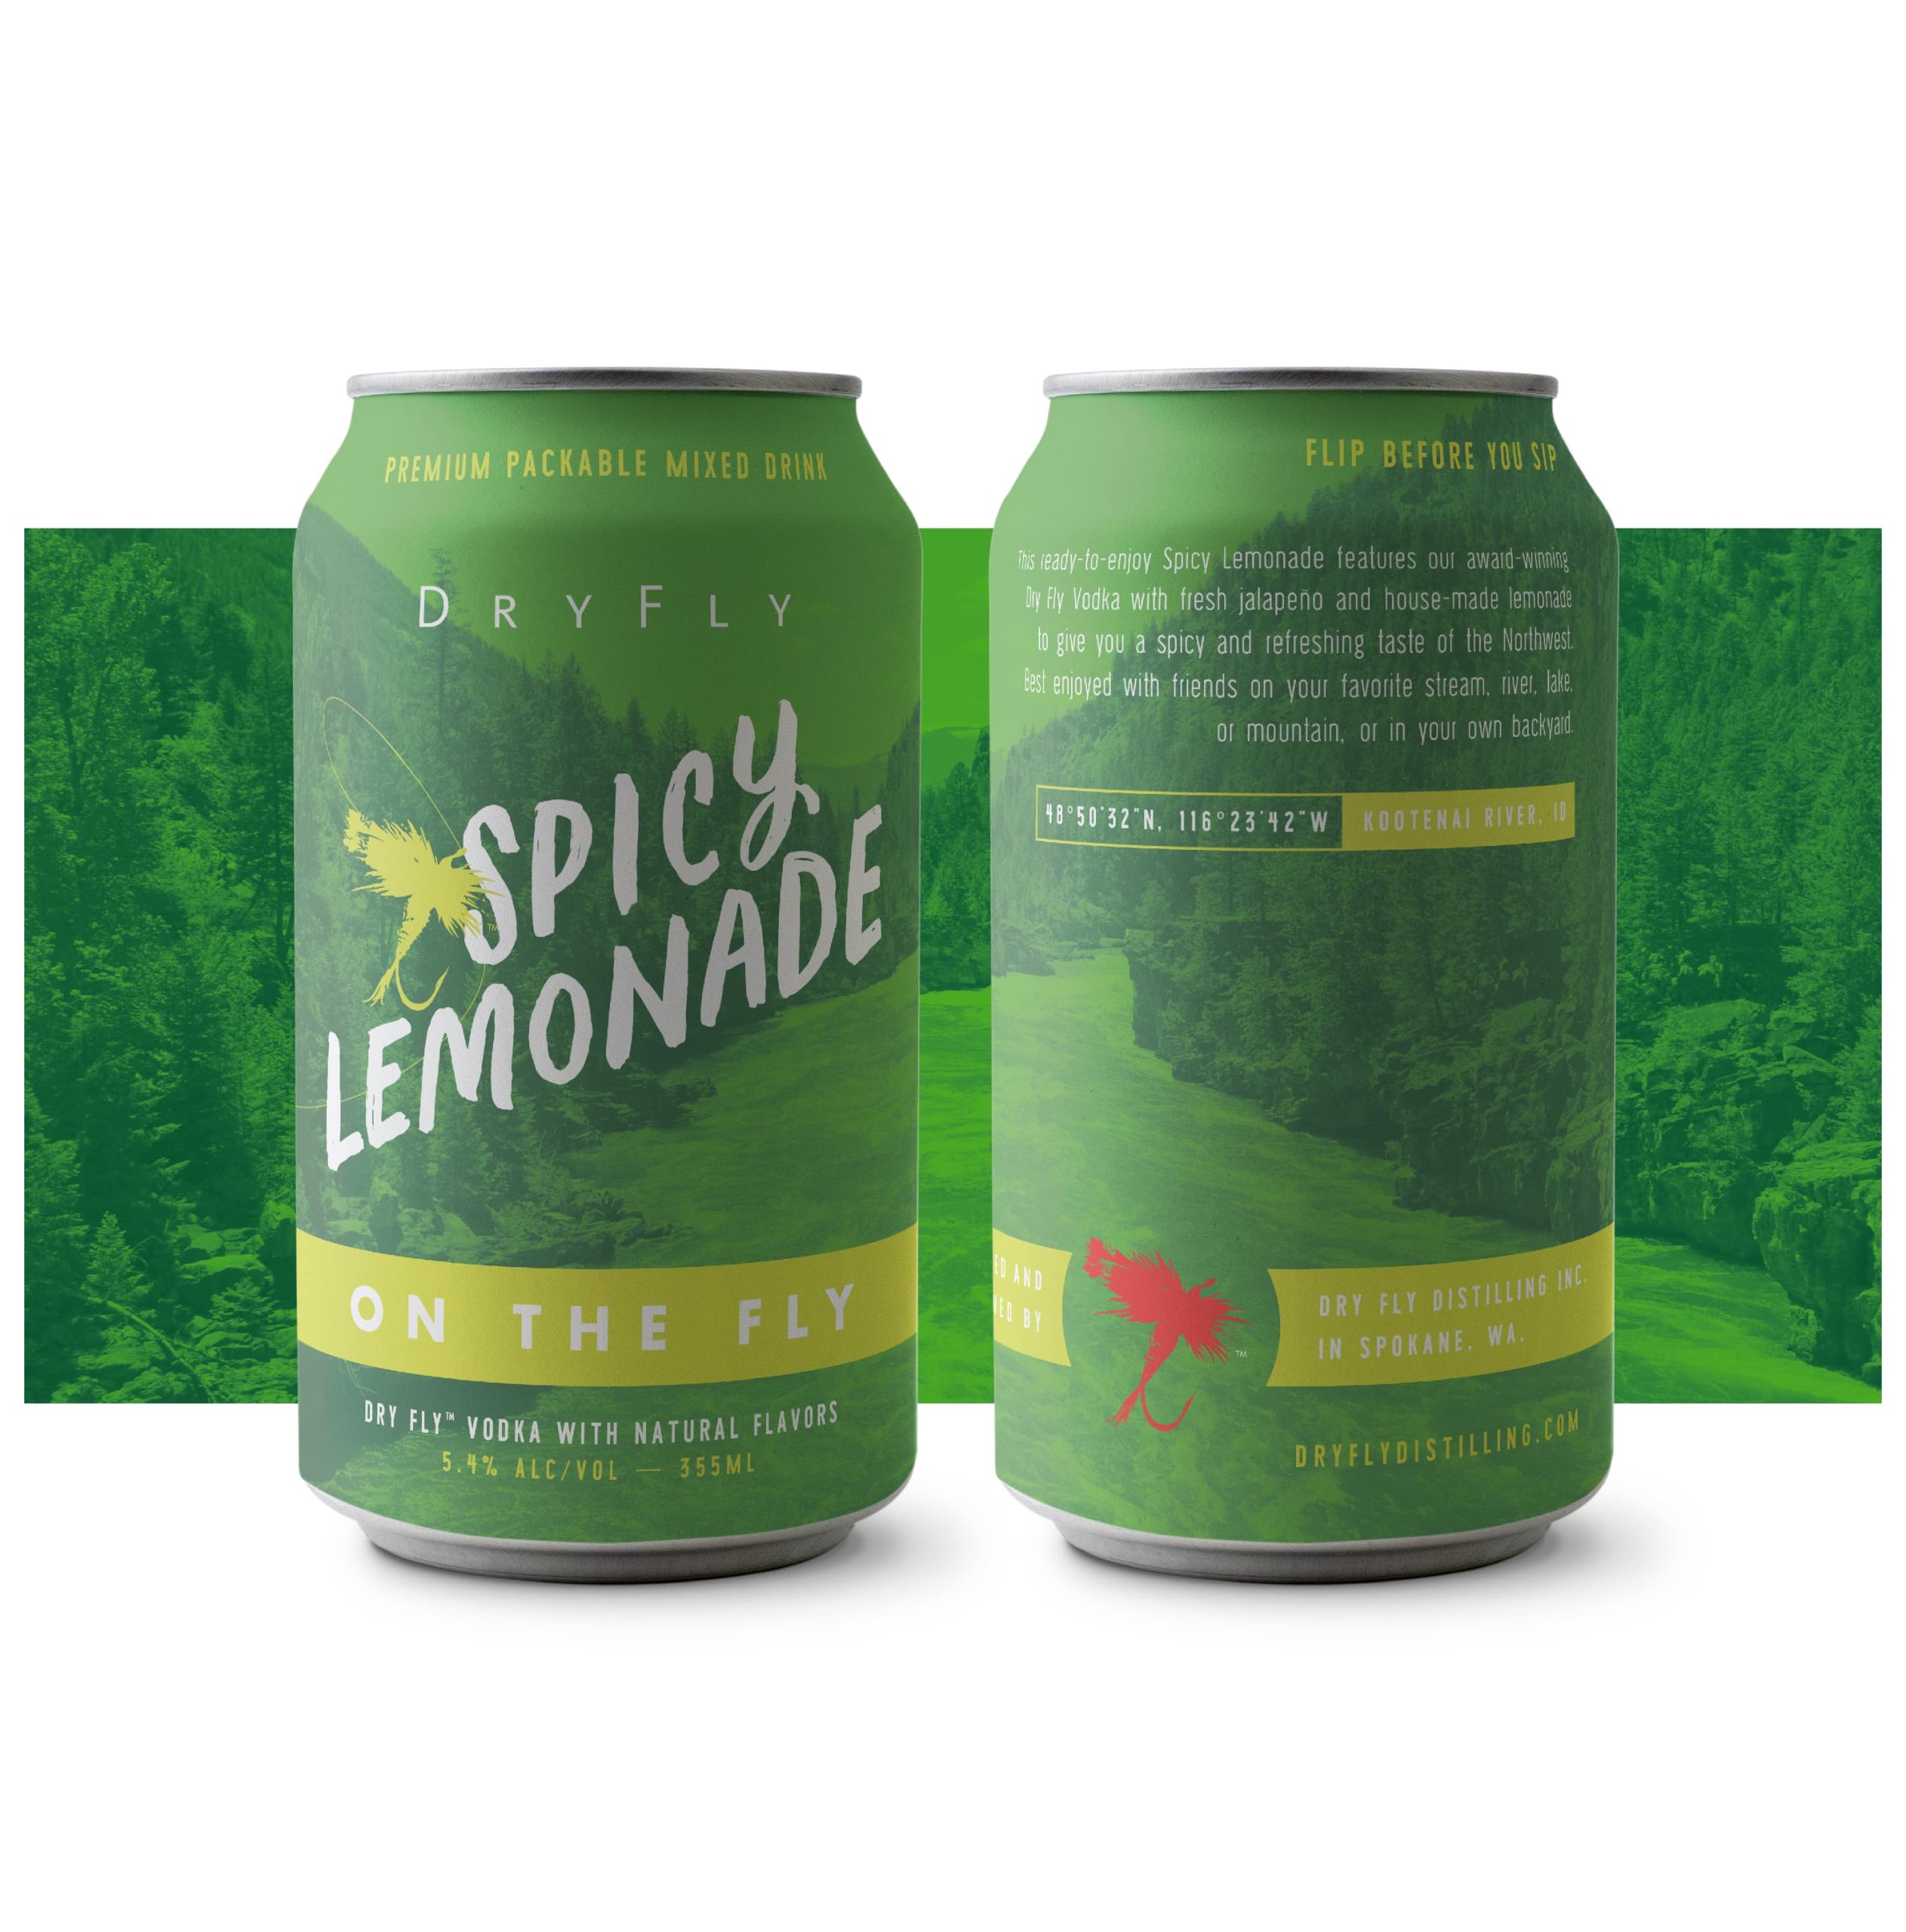 Dry Fly Spicy Lemonade Canned Cocktail Packaging Design